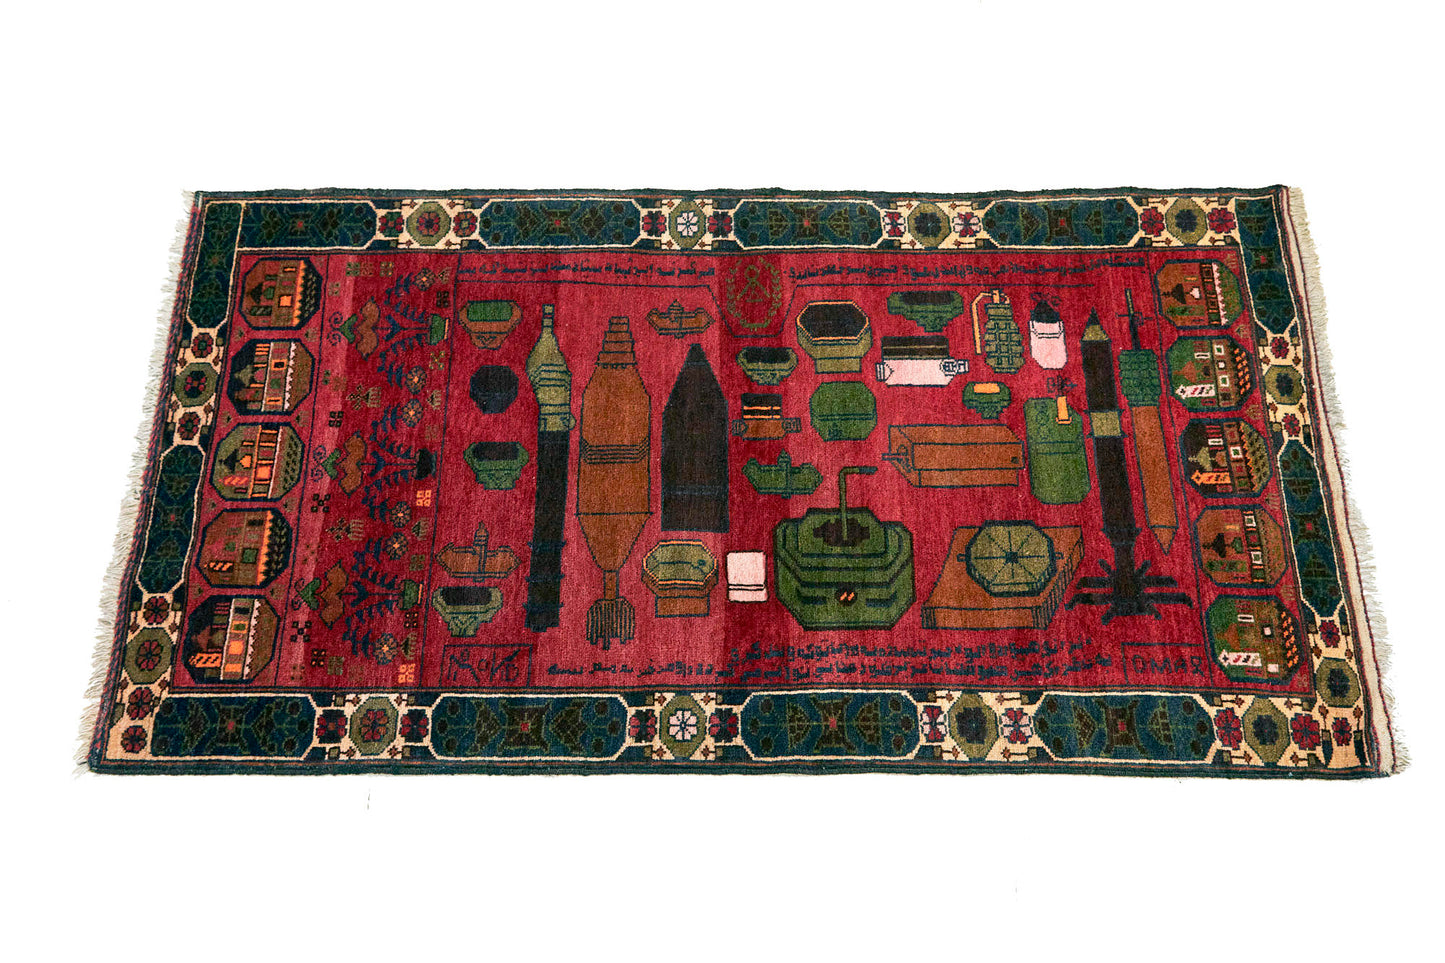 Afghan hand woven "Unexploded Ordinance" rug, with deep red base, and green, yellow, tan and cream images depicting weapons, buildings and flowers - Available from King Kennedy Rugs Los Angeles